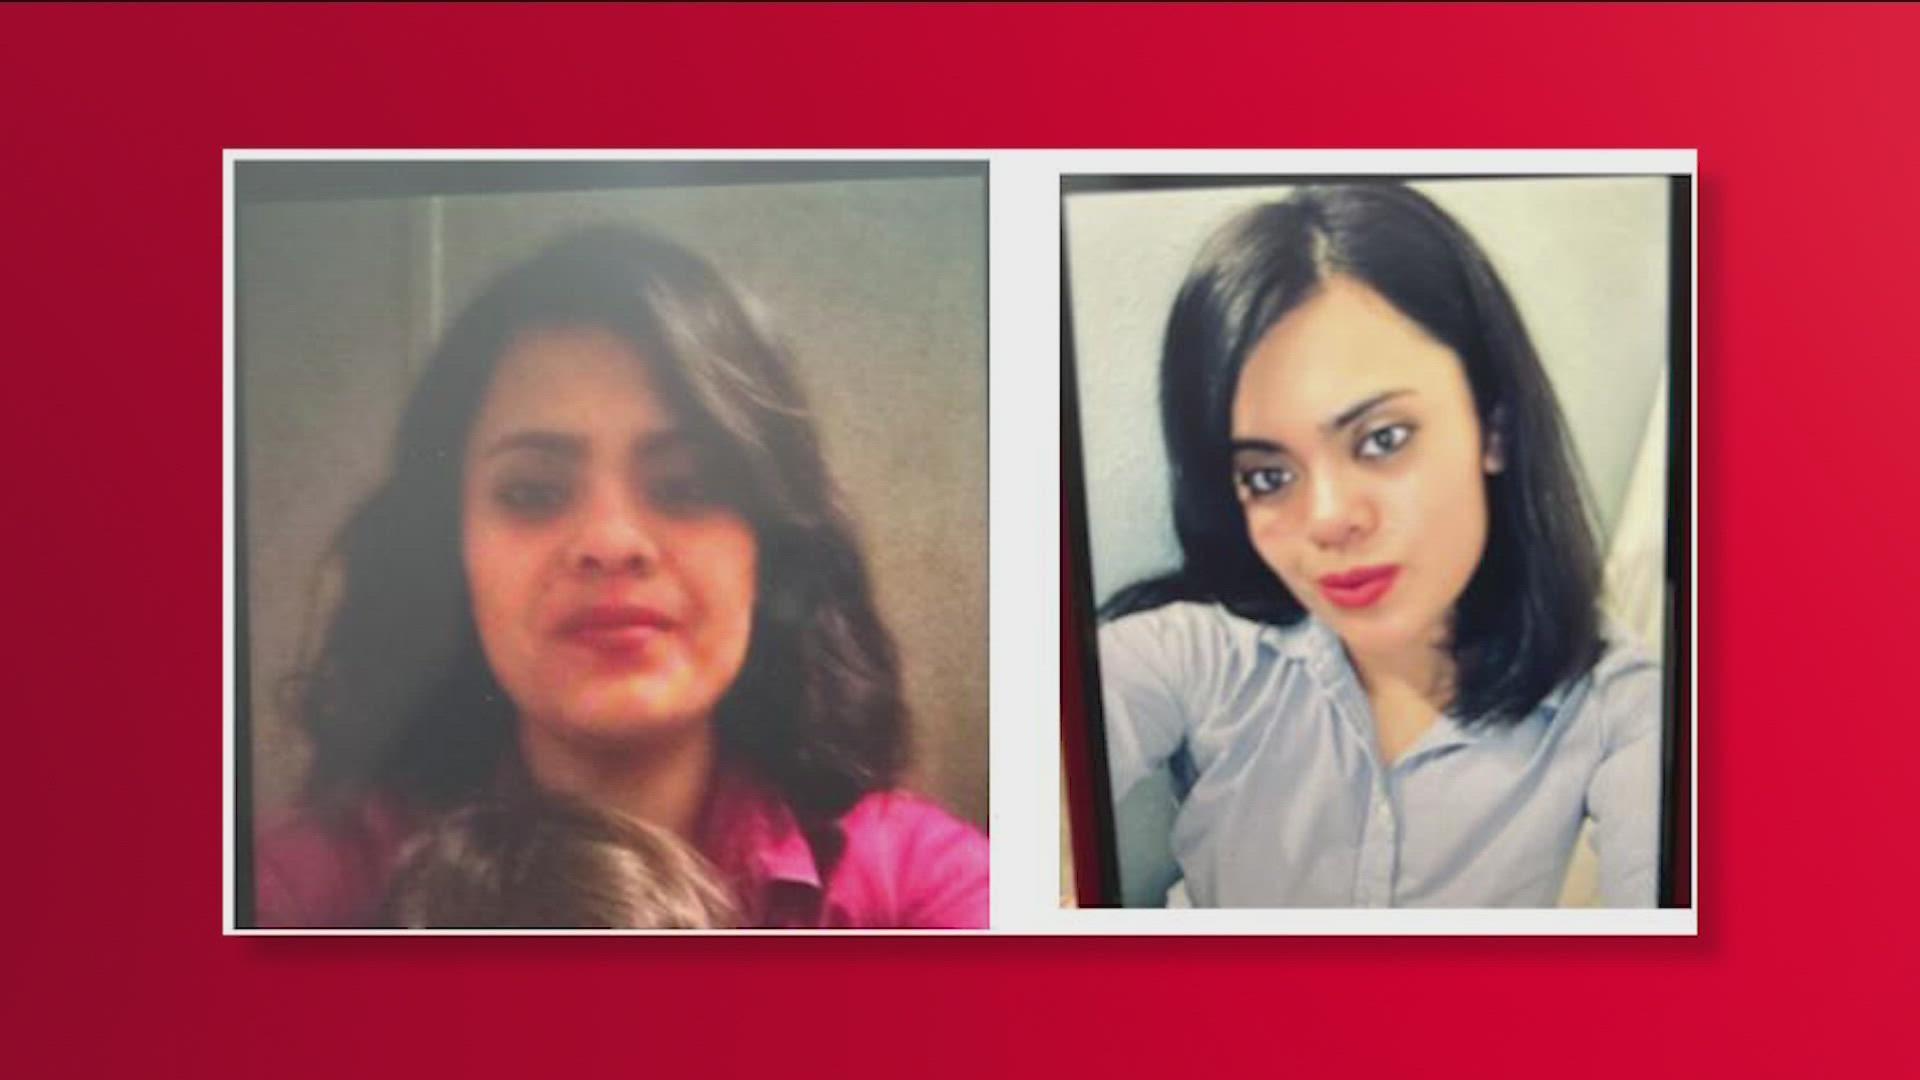 The Travis County Sheriff's Office is looking for a woman who was last seen on Jan. 7.